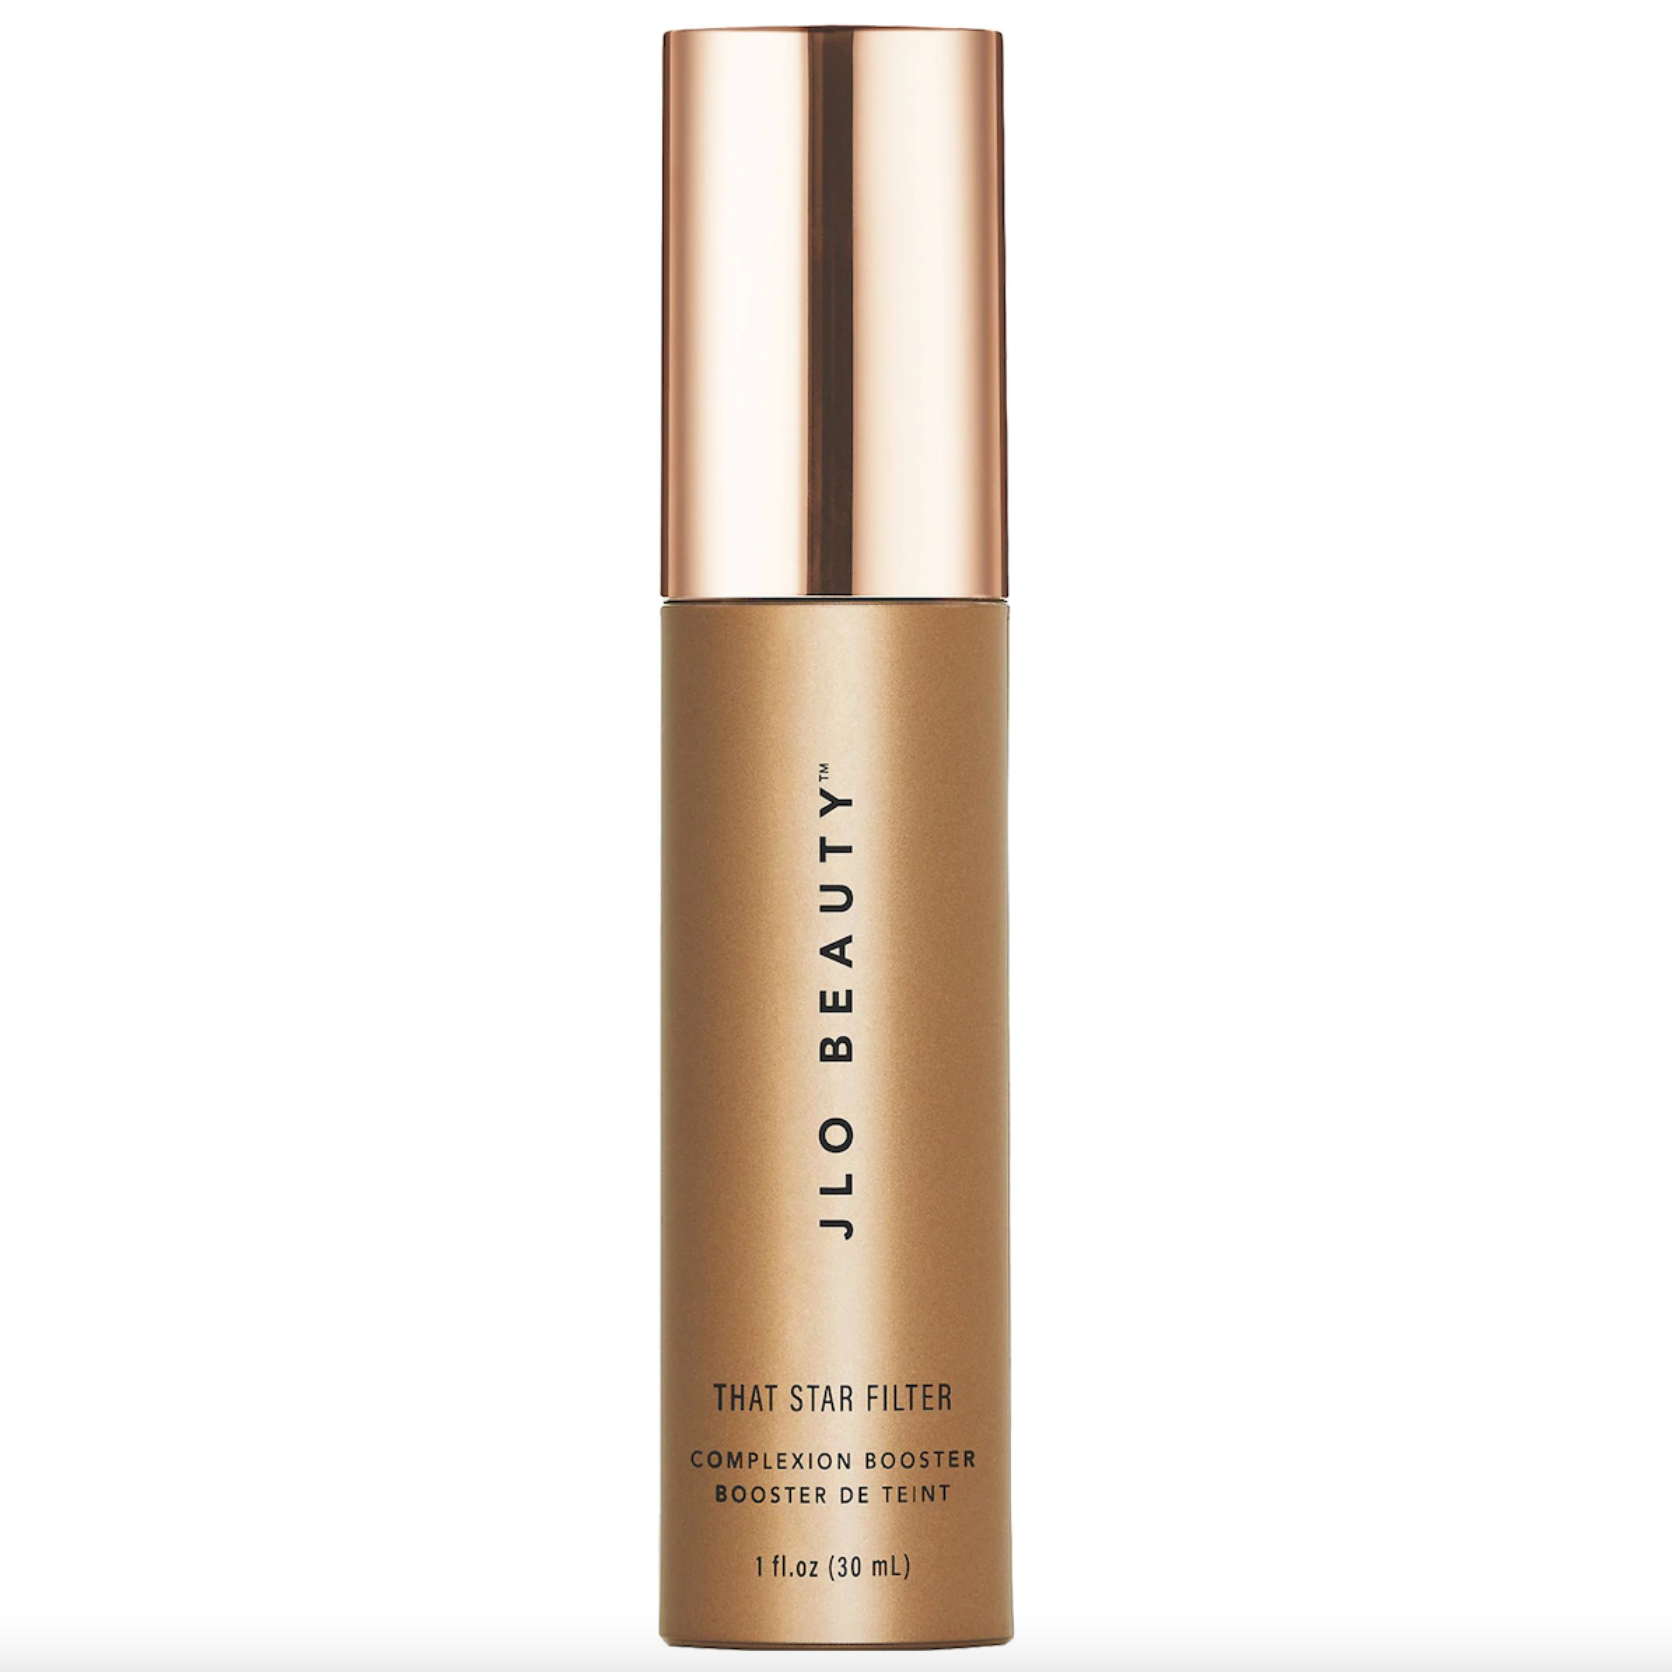 JLO Beauty That Star Filter Highlighting Complexion Booster